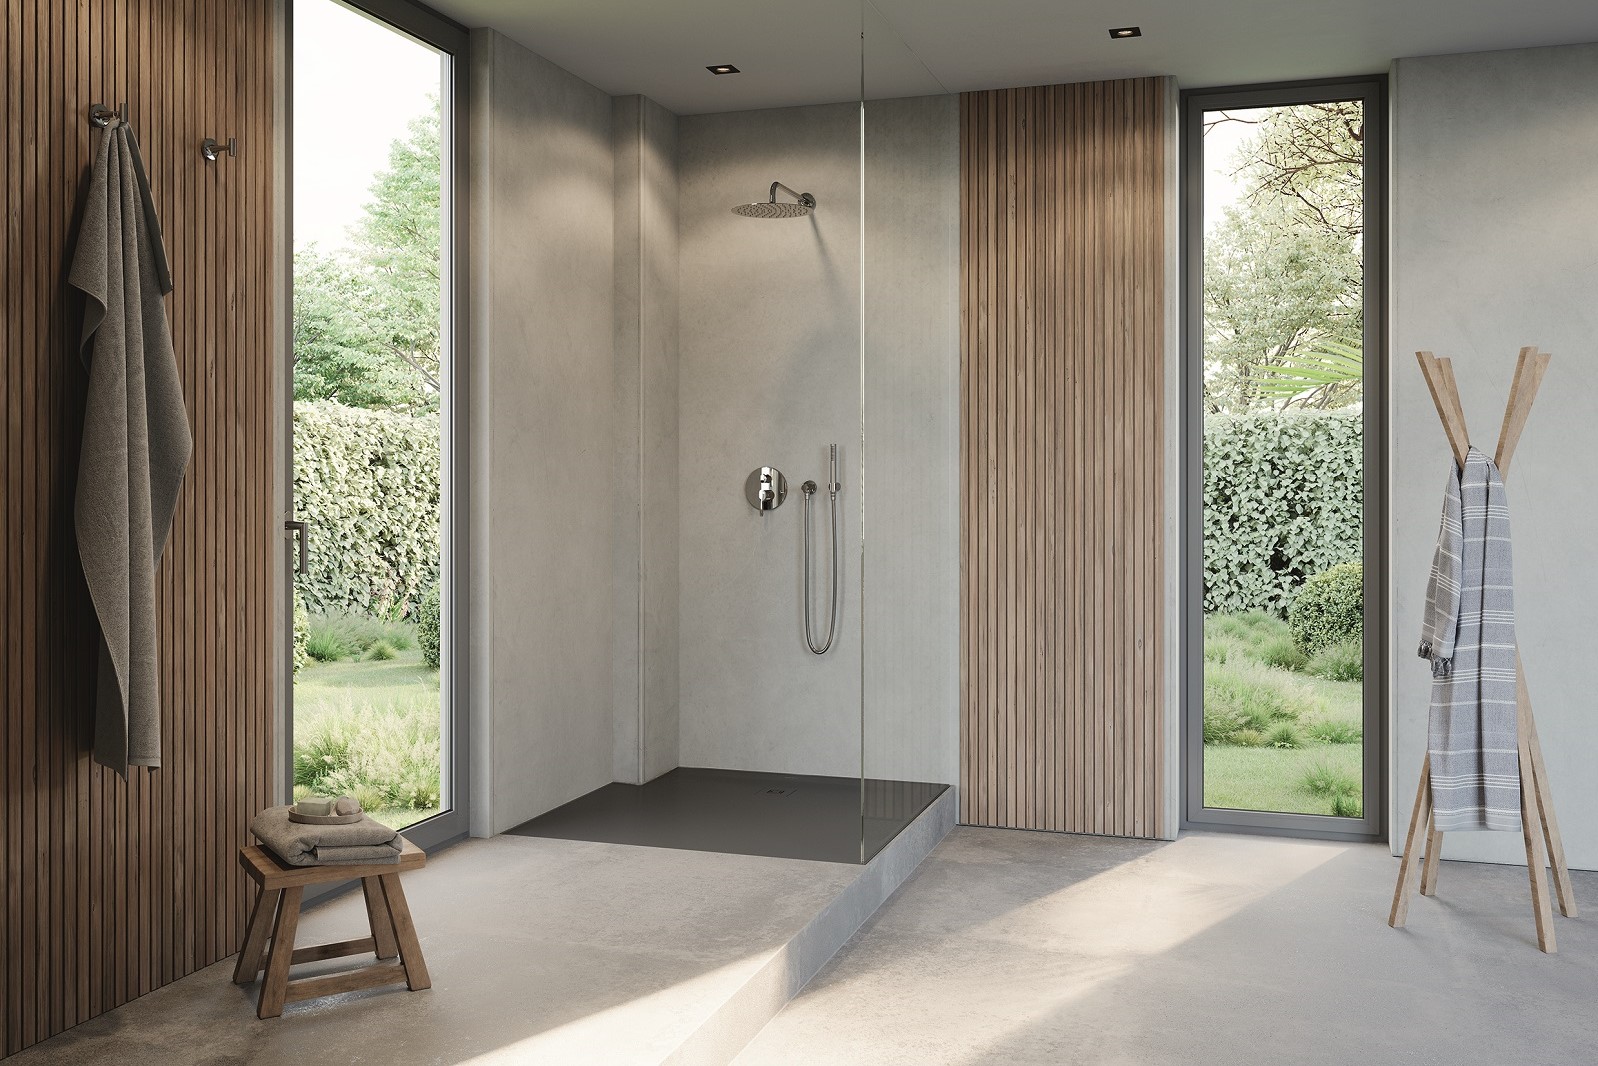 Sustano recyclable shower tray from Duravit